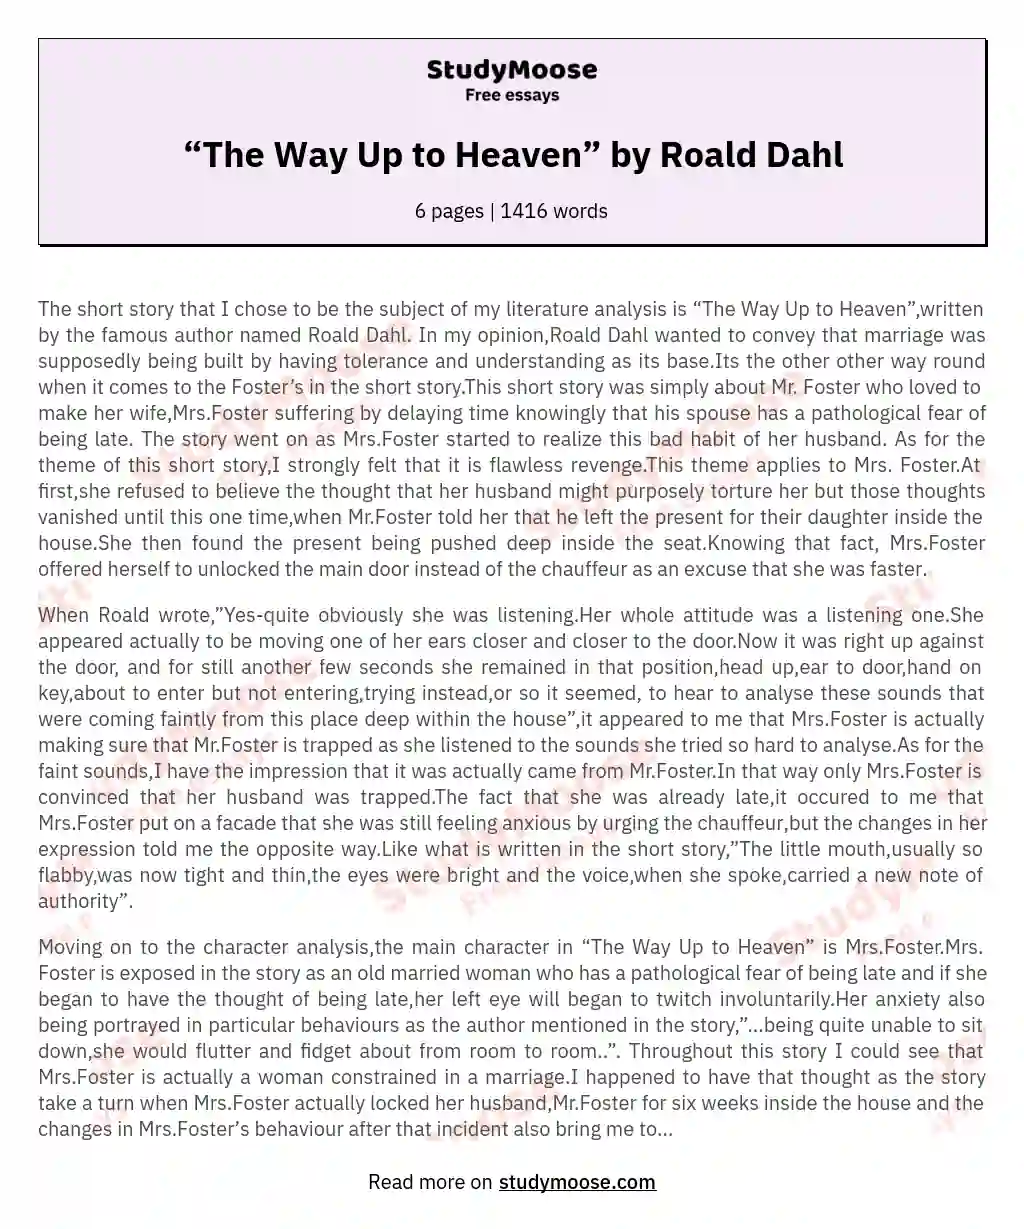 “The Way Up to Heaven” by Roald Dahl essay